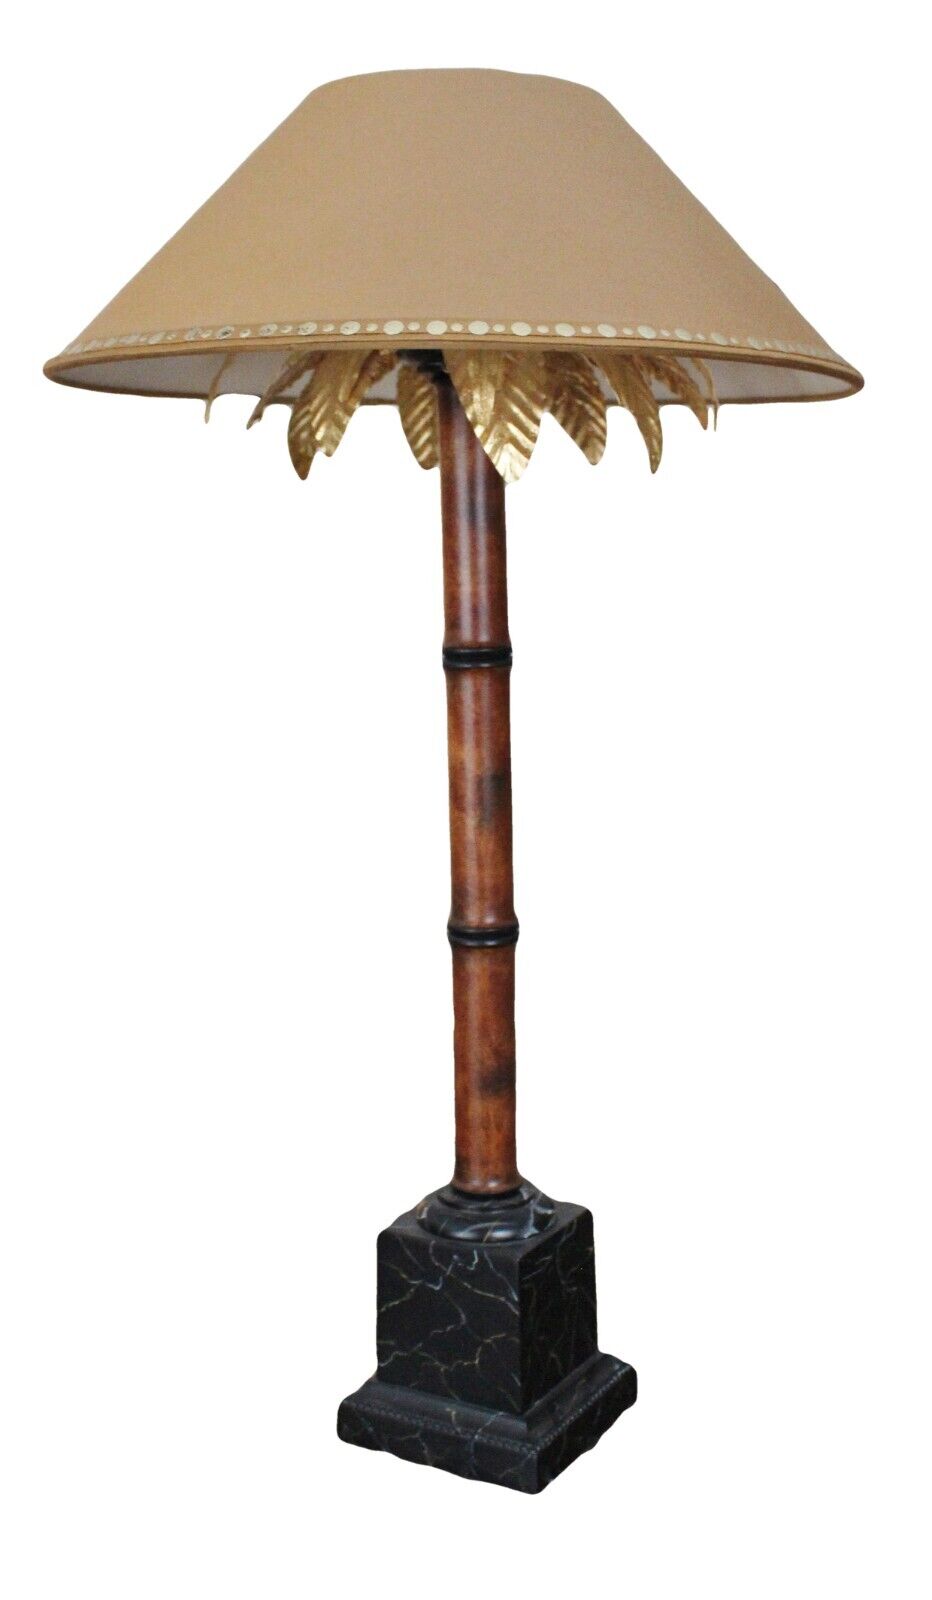 Raymond Waites LAMP Tyndale Frederick Cooper Torchiere Table Palm Leaf Bamboo